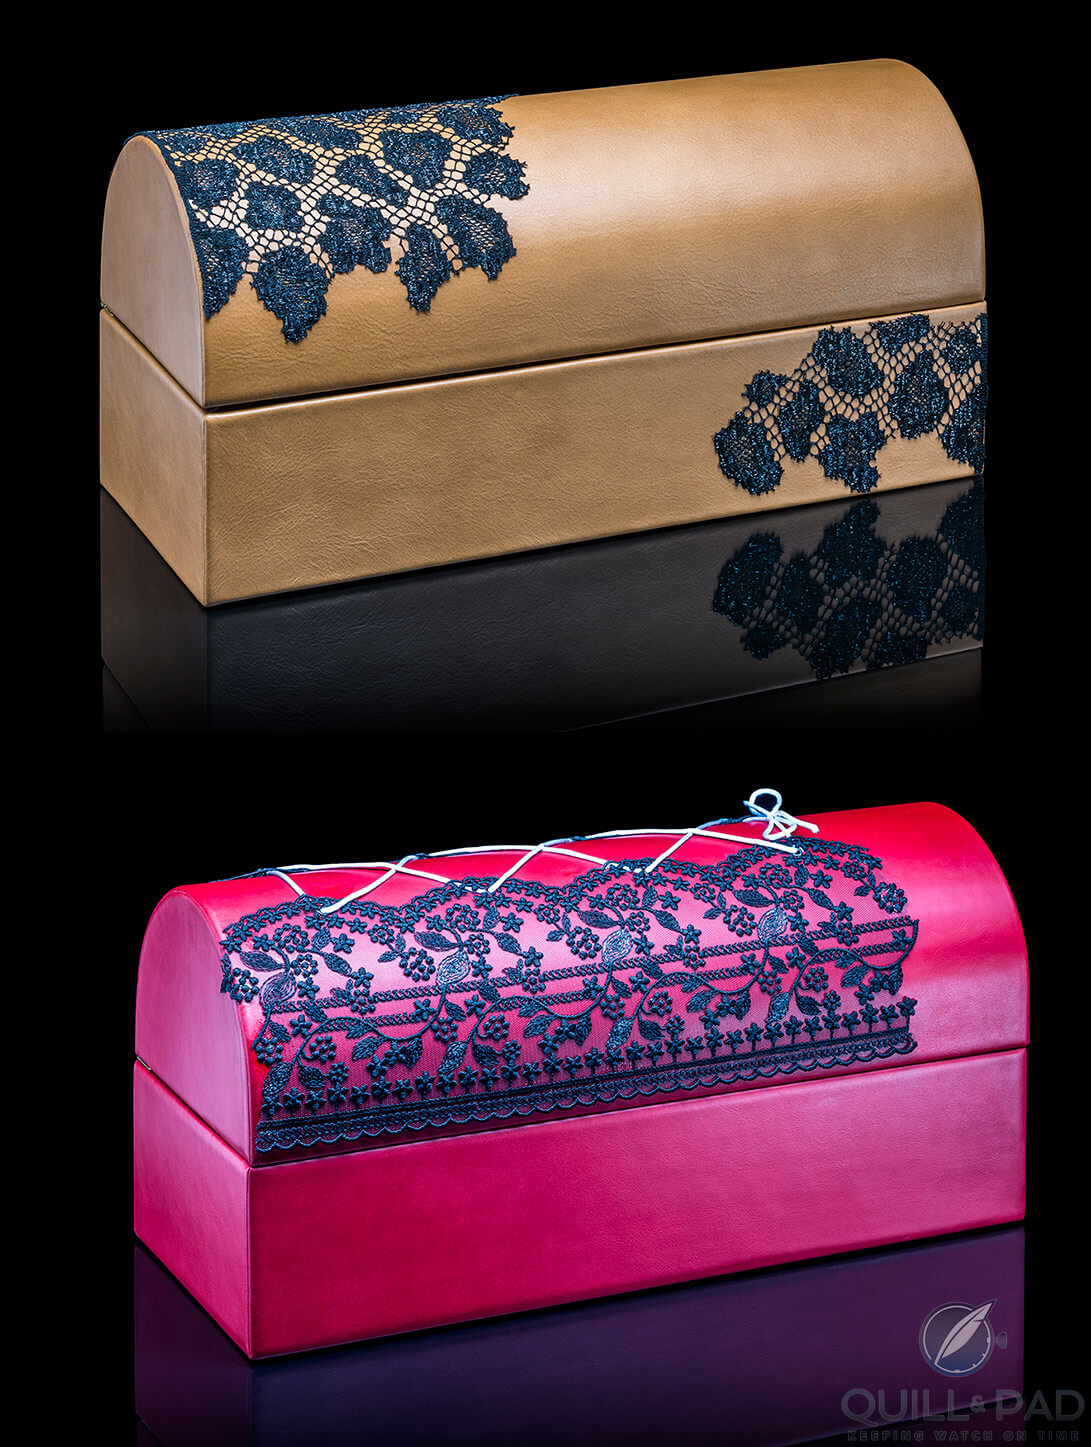 Luxuriously leather clad cases for Charles Clavem champagne